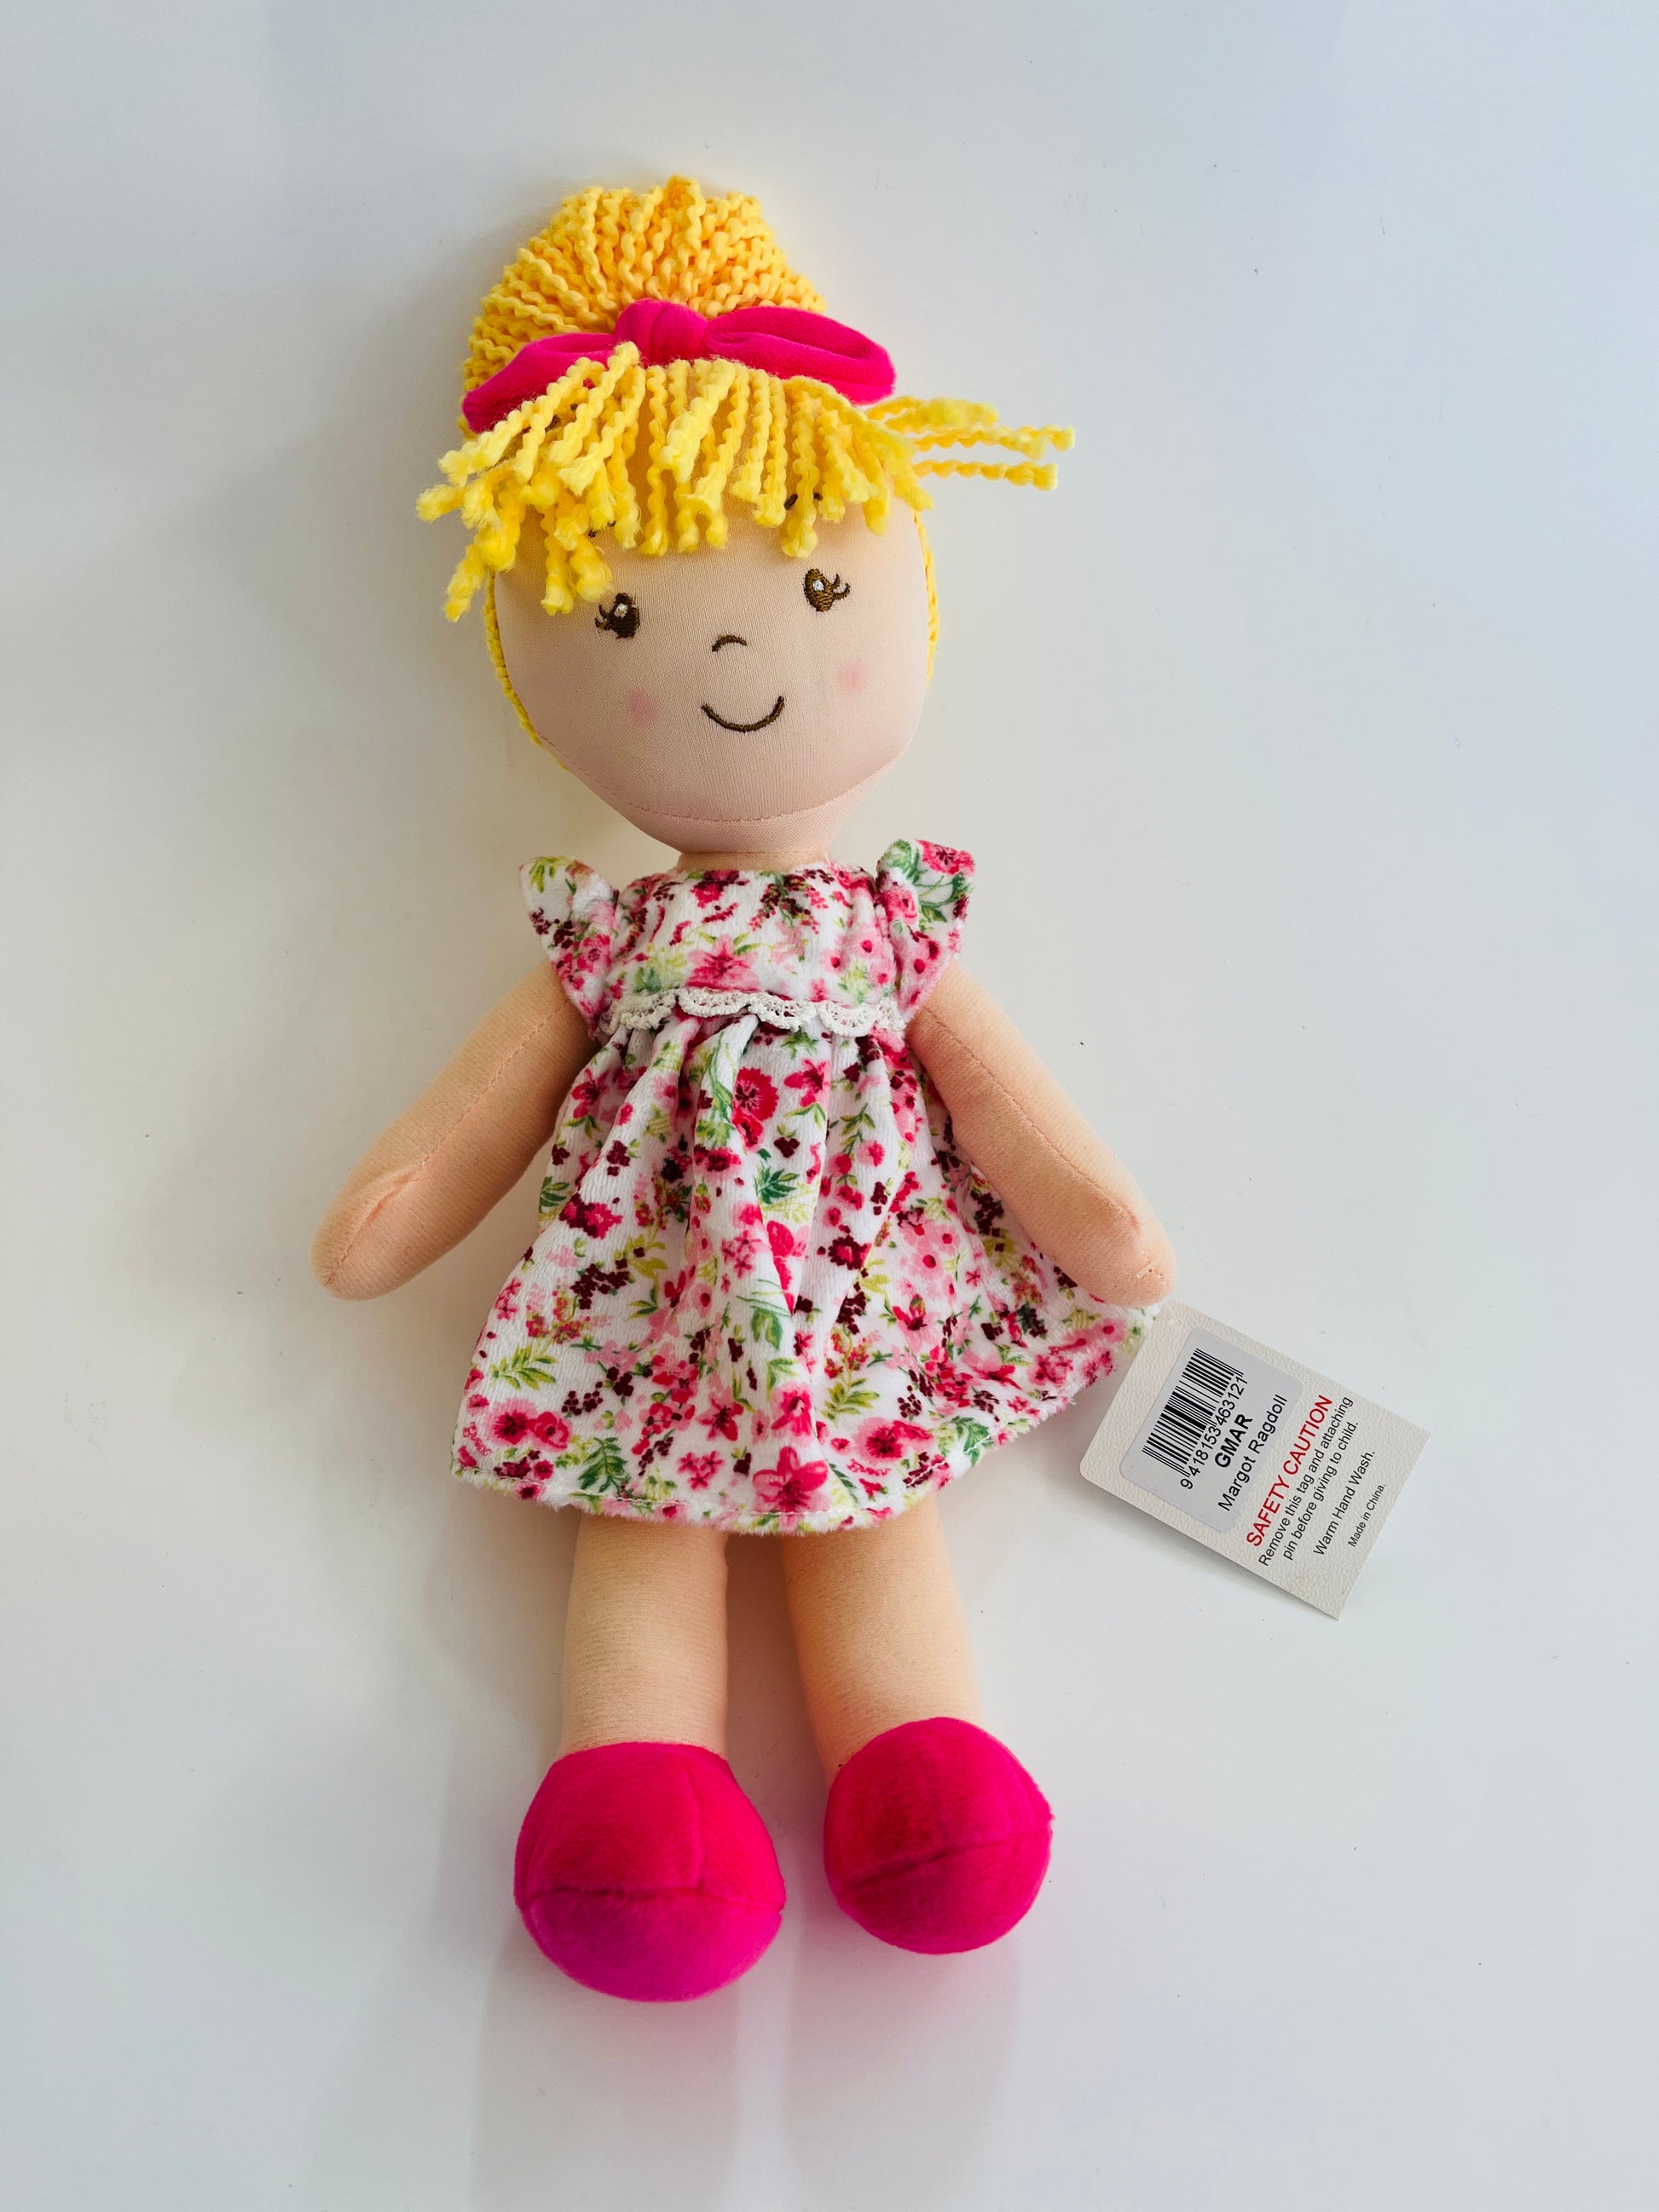 rag doll blond hair and floral dress 